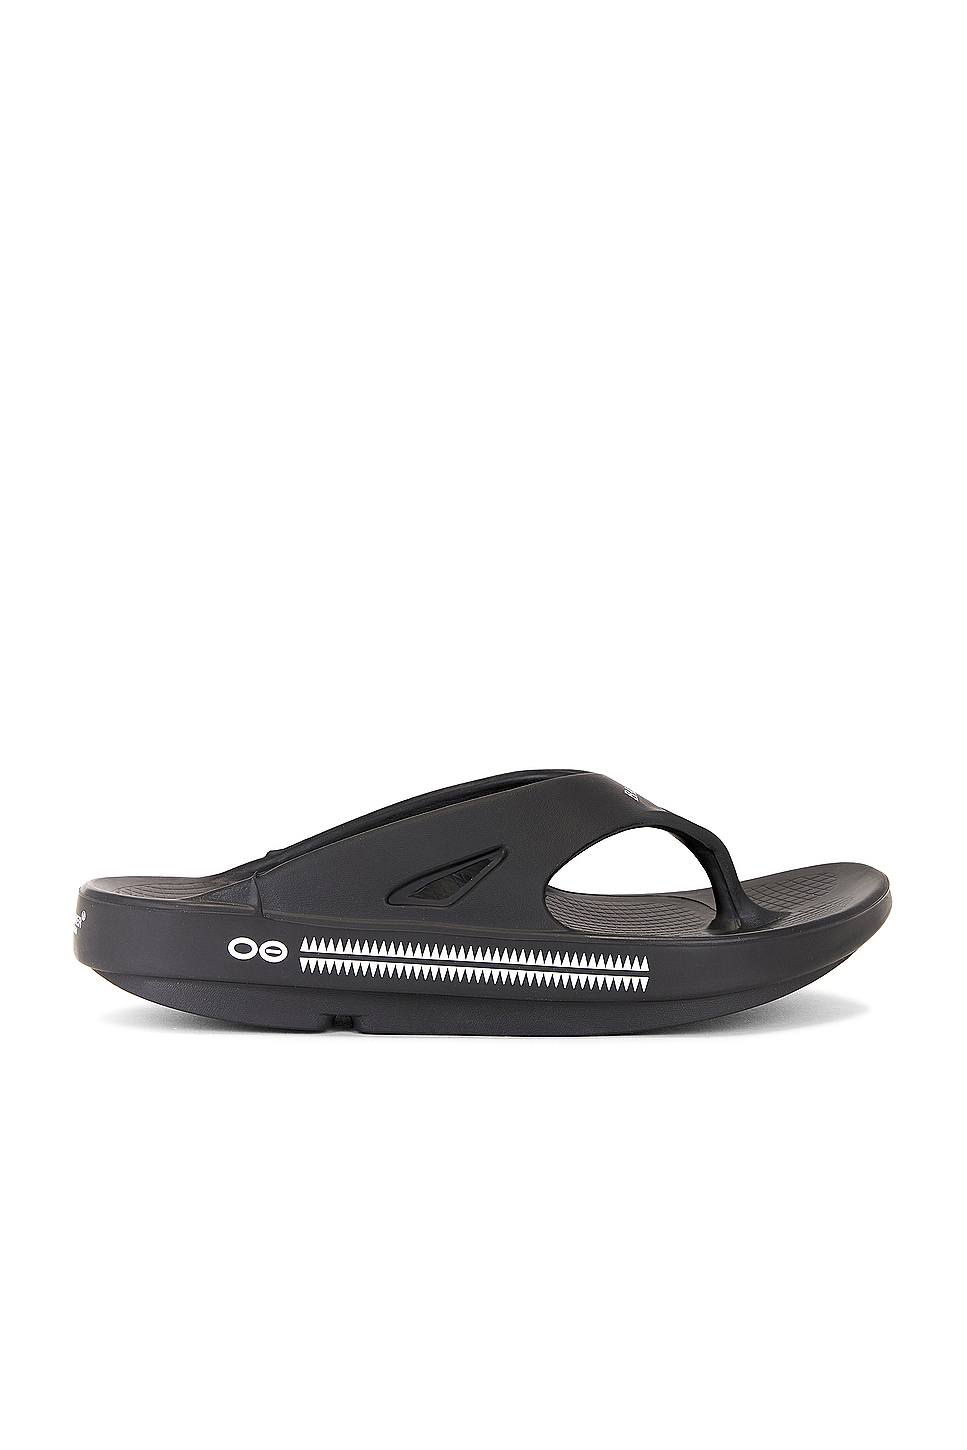 Image 1 of Undercover x OOFOS Sandal in Black